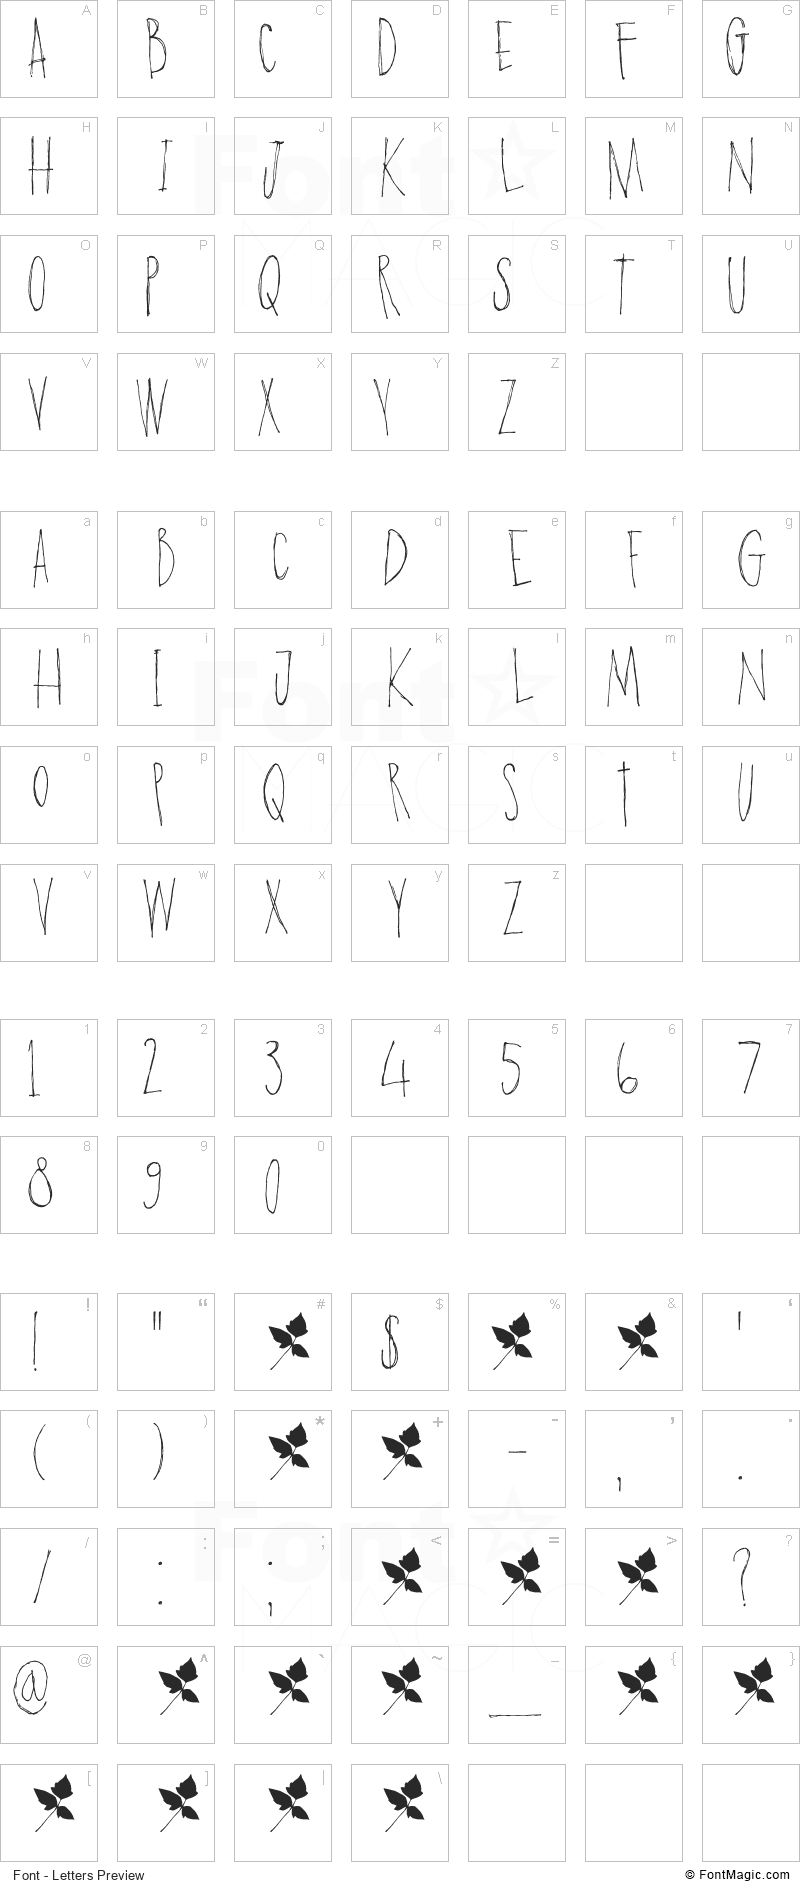 DK Poison Ivy Font - All Latters Preview Chart